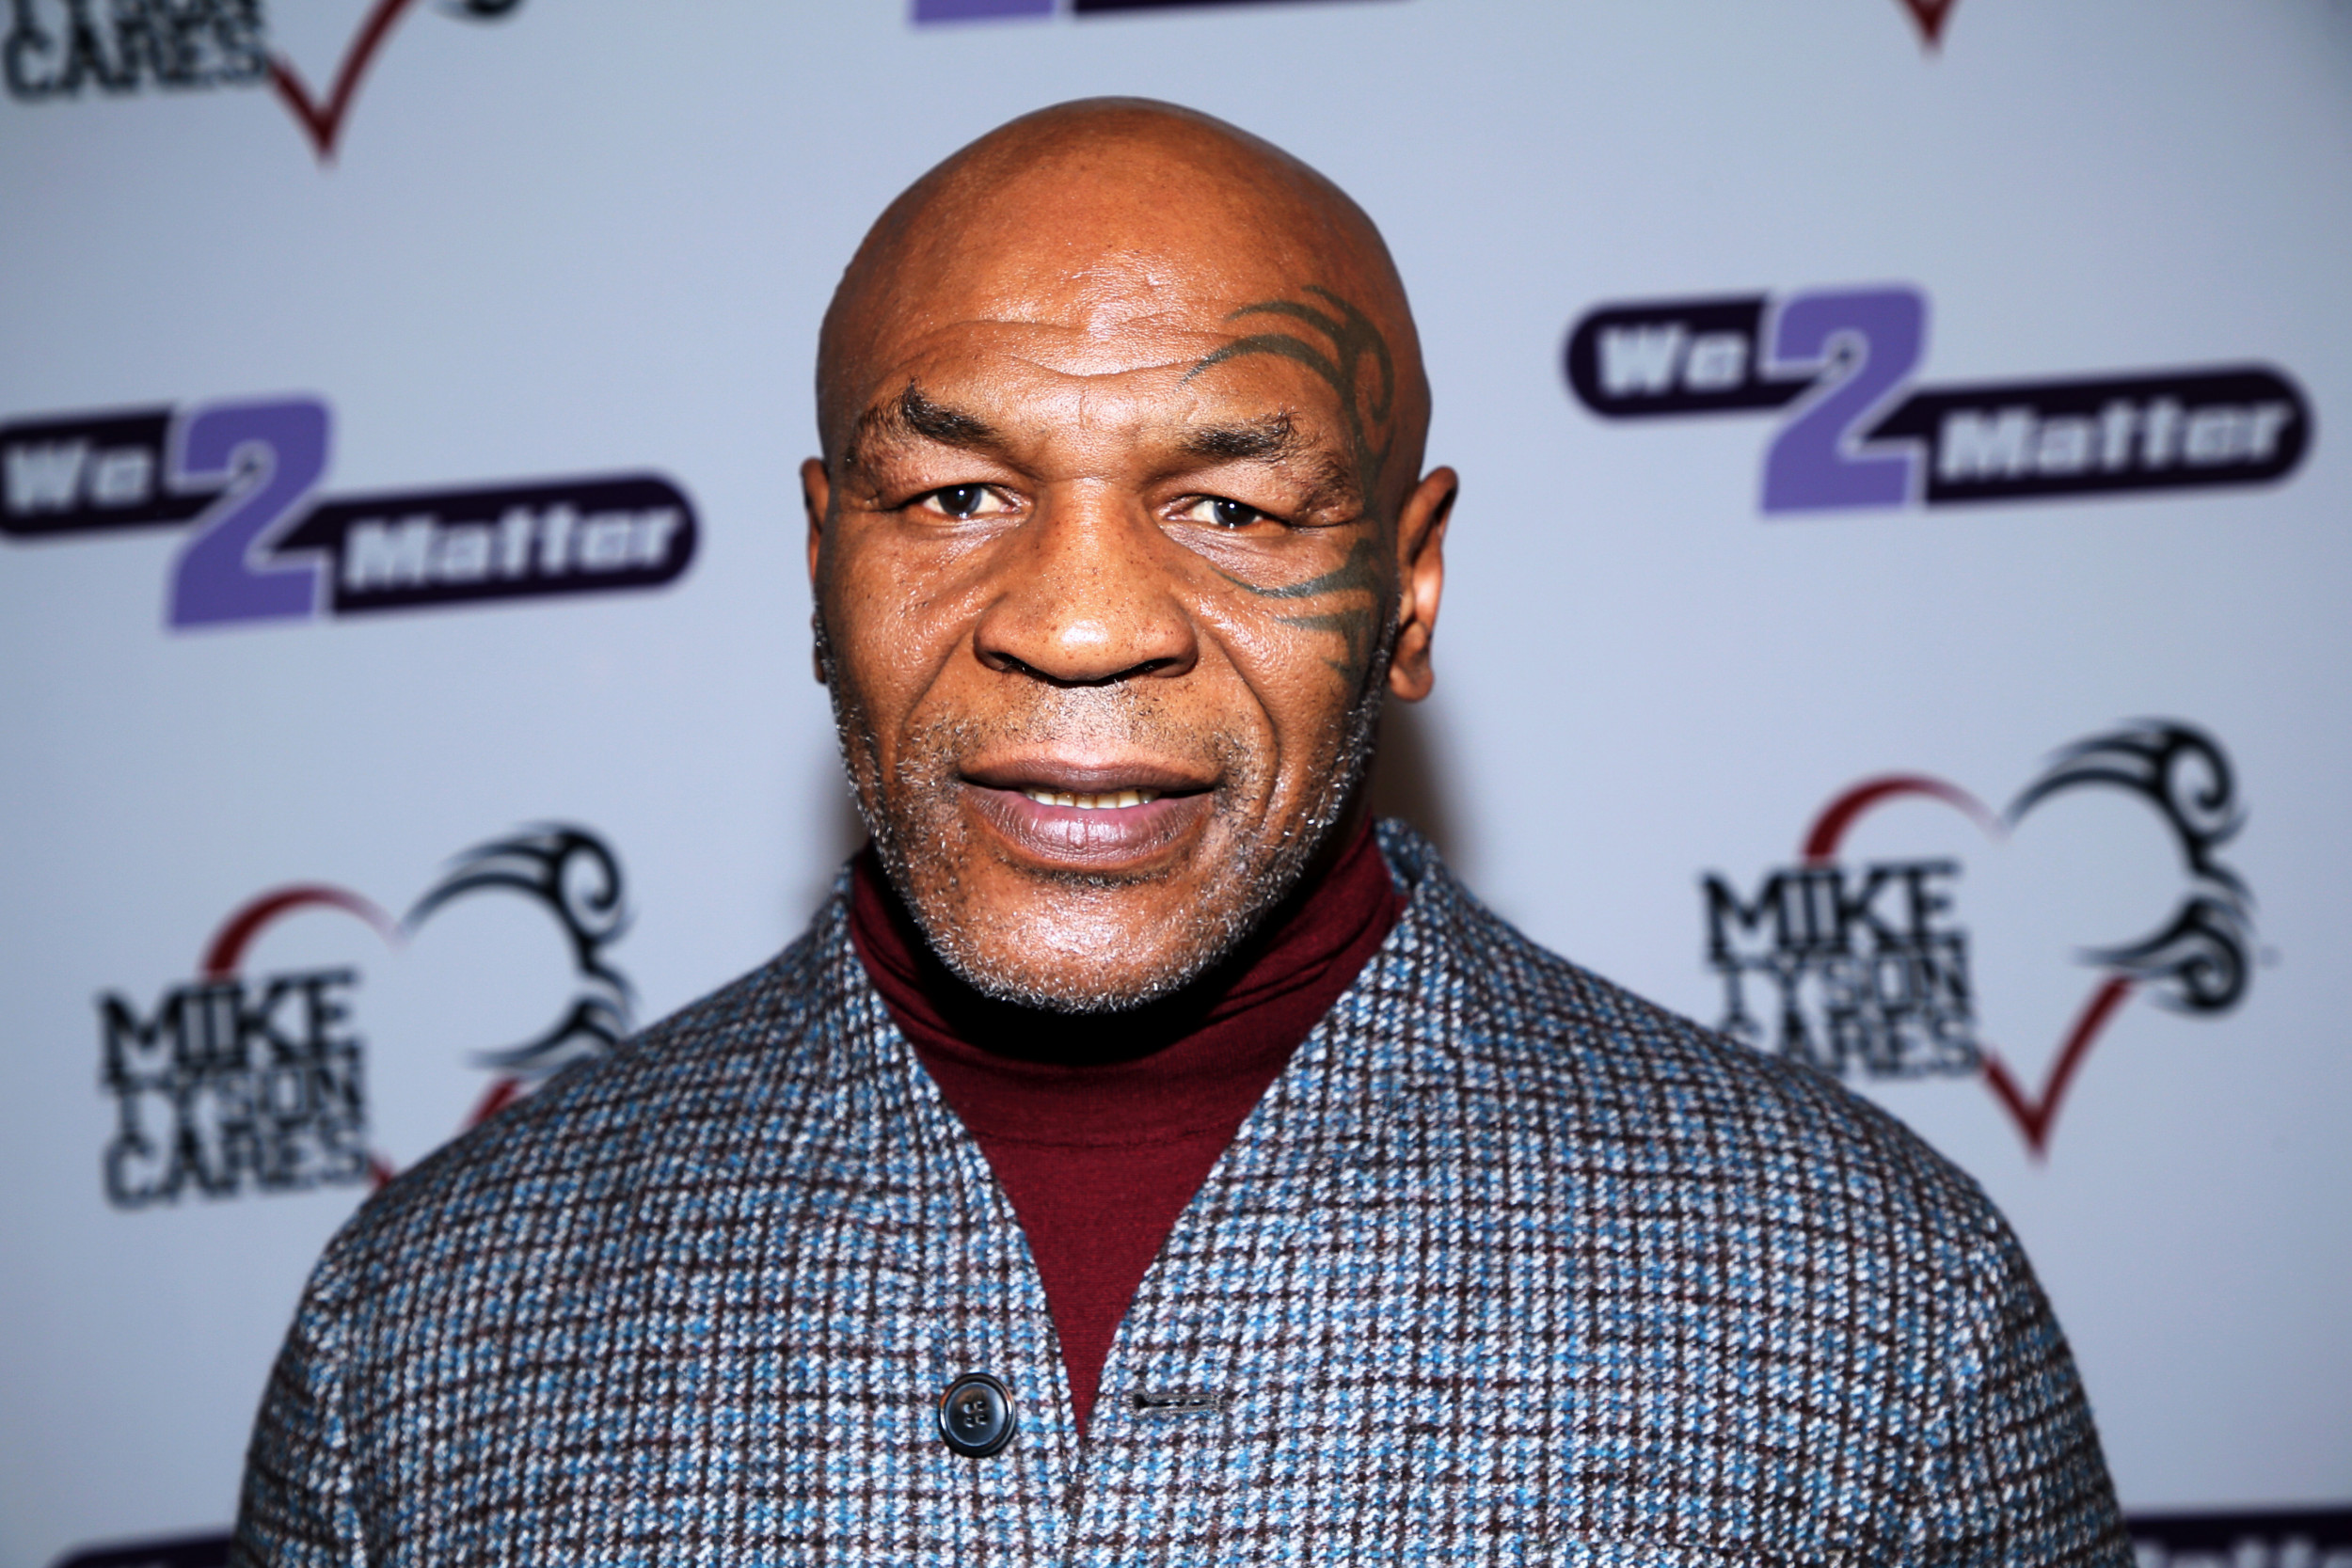 Mike Tyson Sued After Viral Plane Fight: What Happened on That JetBlue Flight?